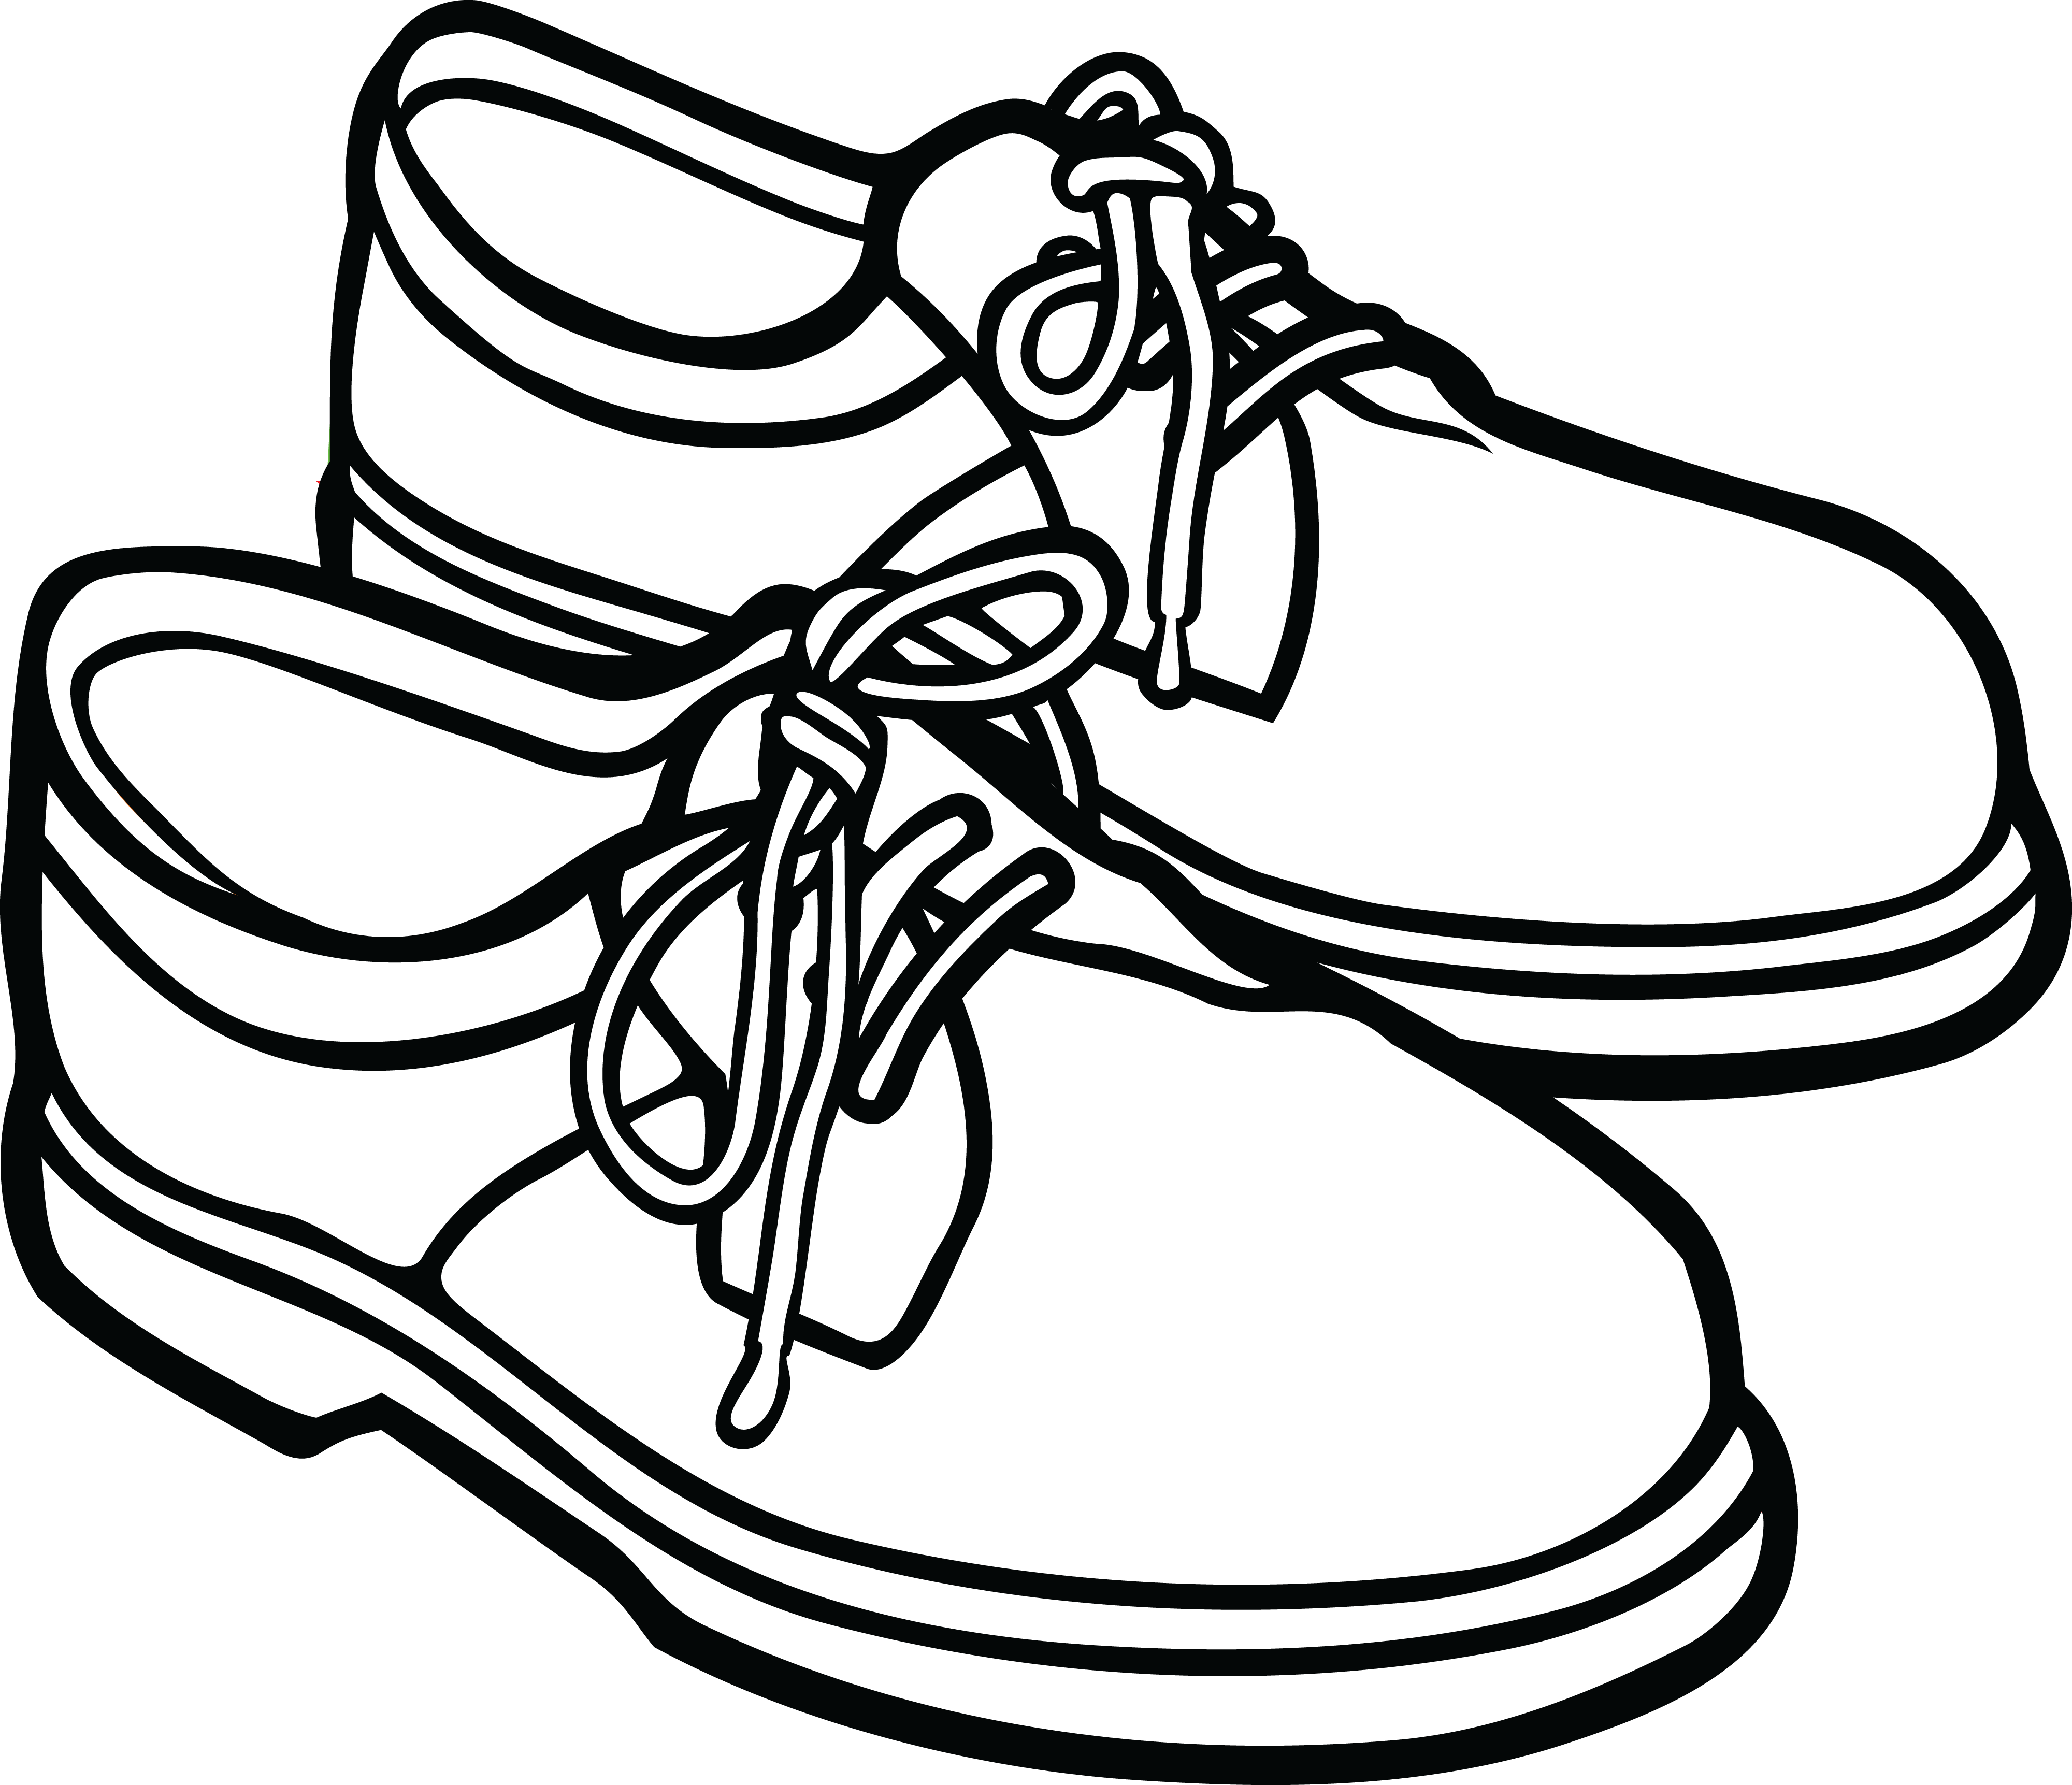 Free Converse Clipart Black And White Download Free Clip Art Free Clip Art On Clipart Library